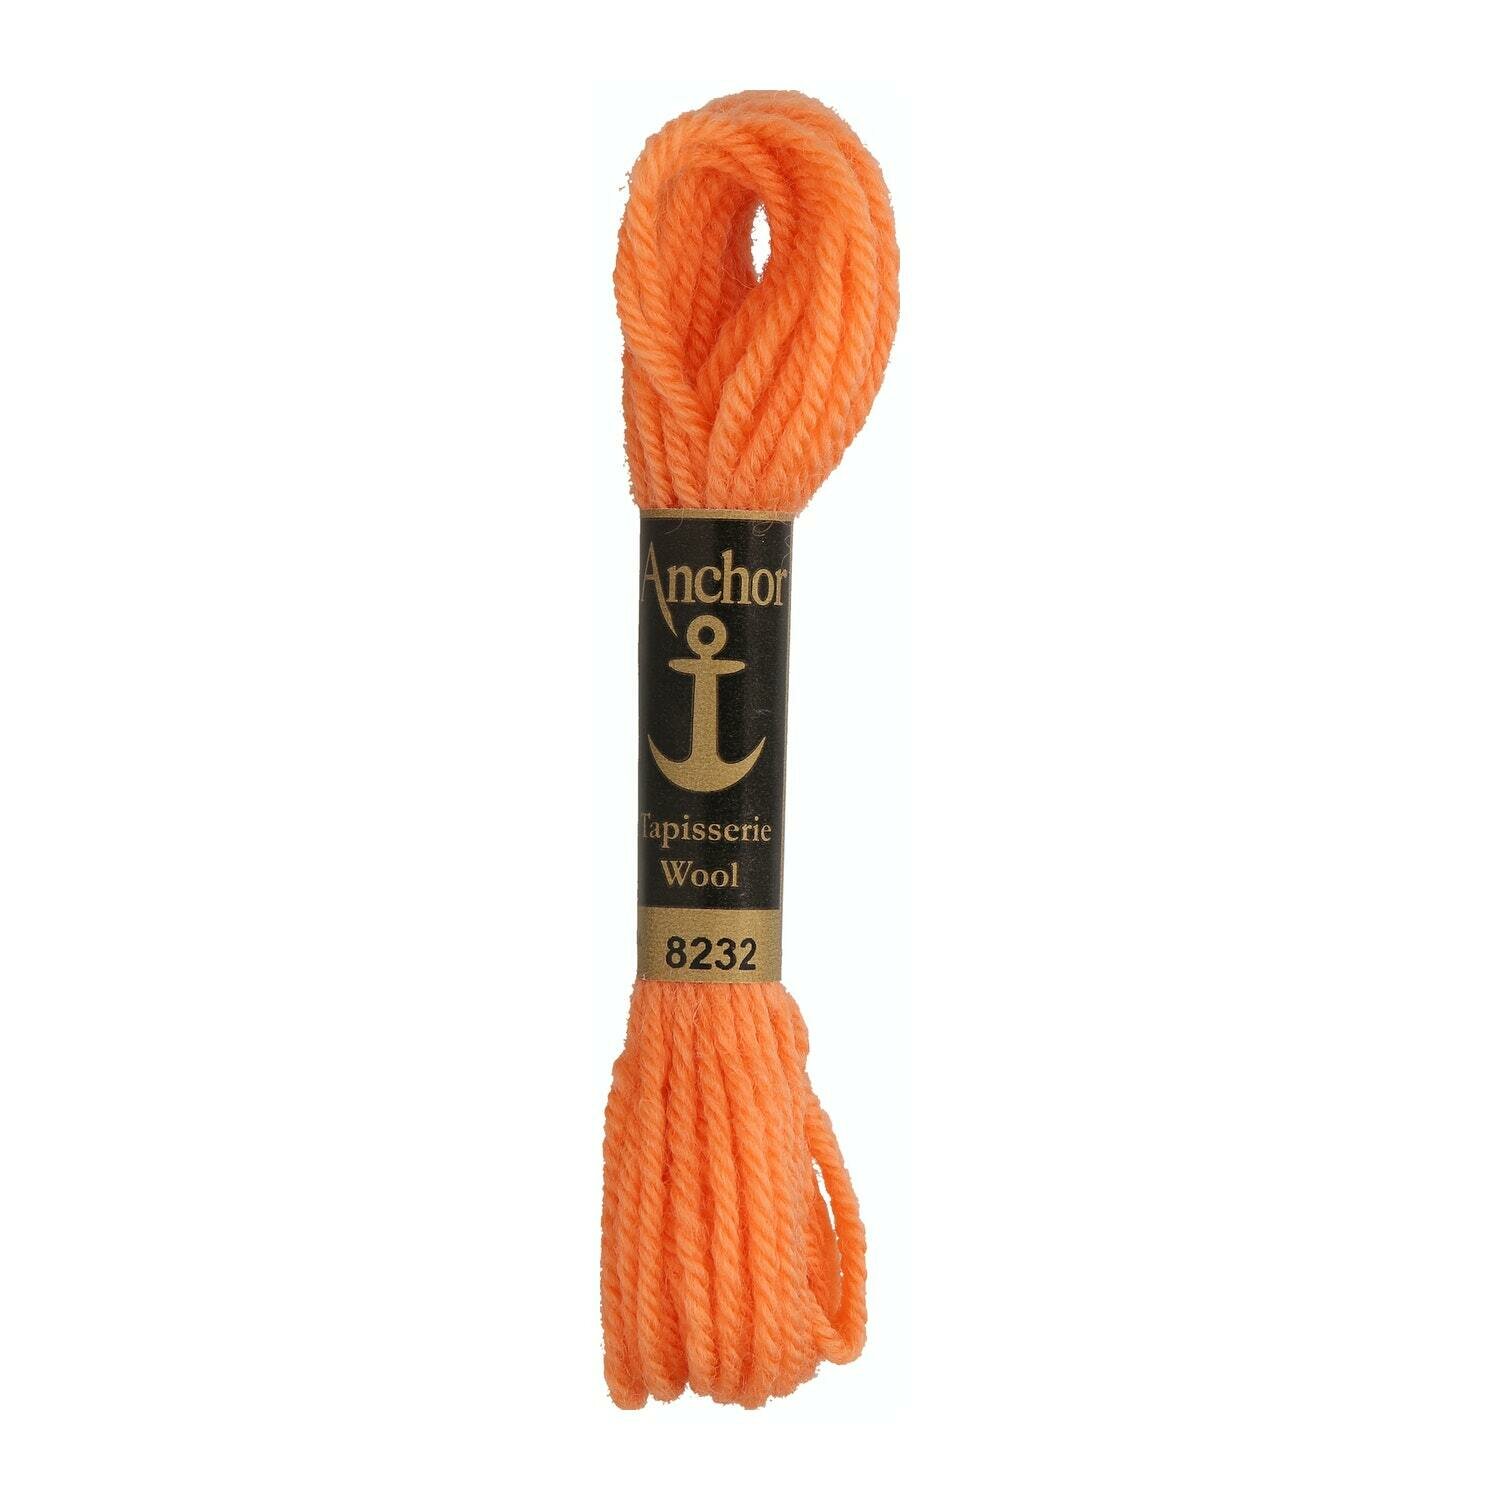 Anchor Tapisserie Wool # 08232